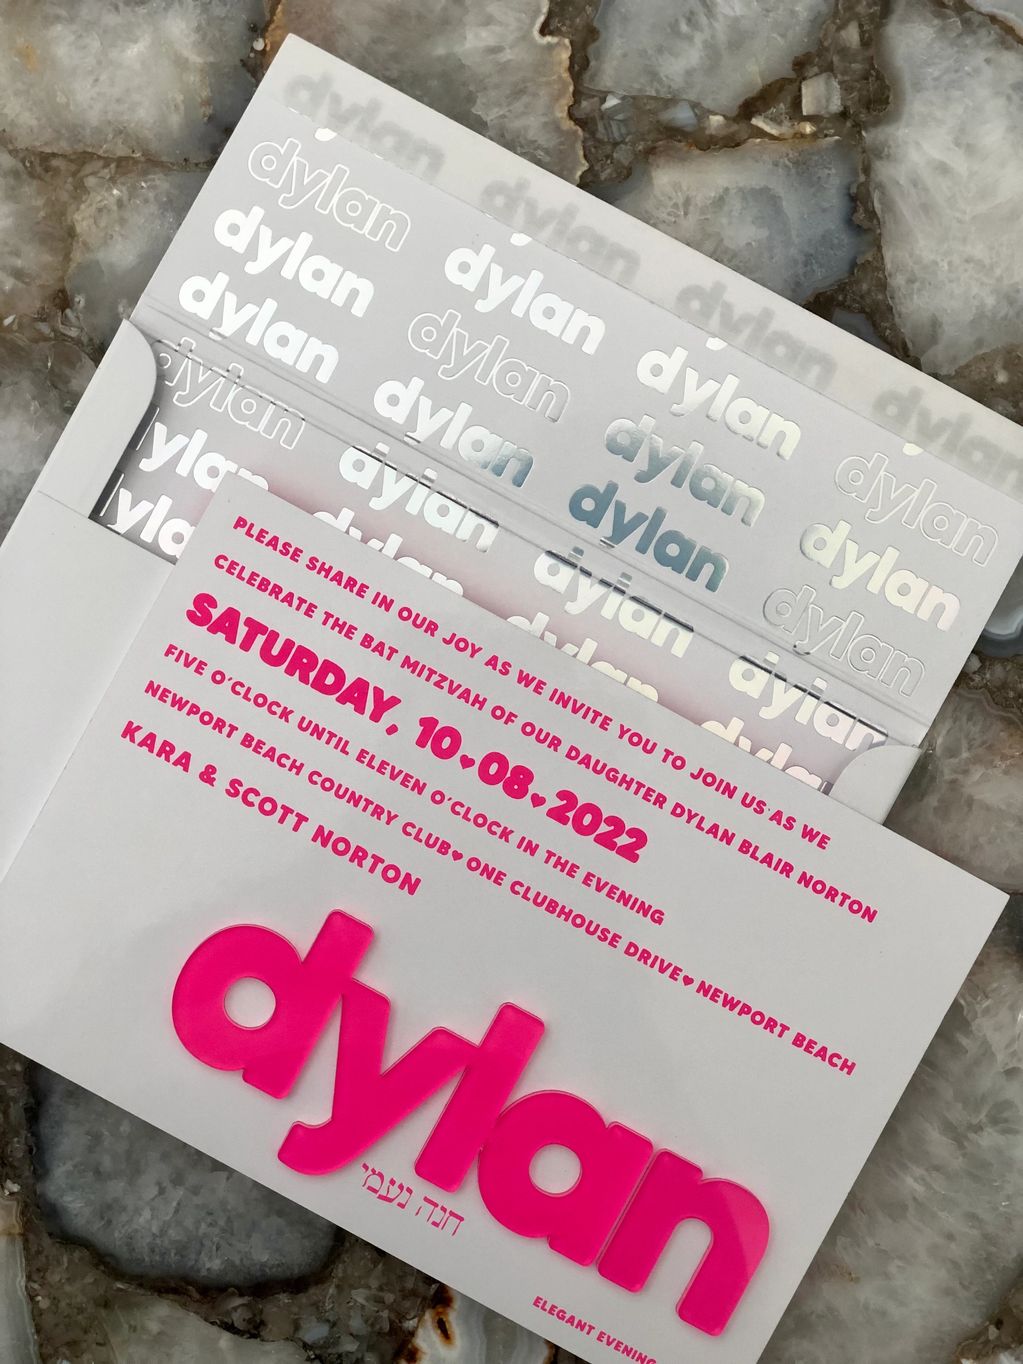 The Dylan N Invite